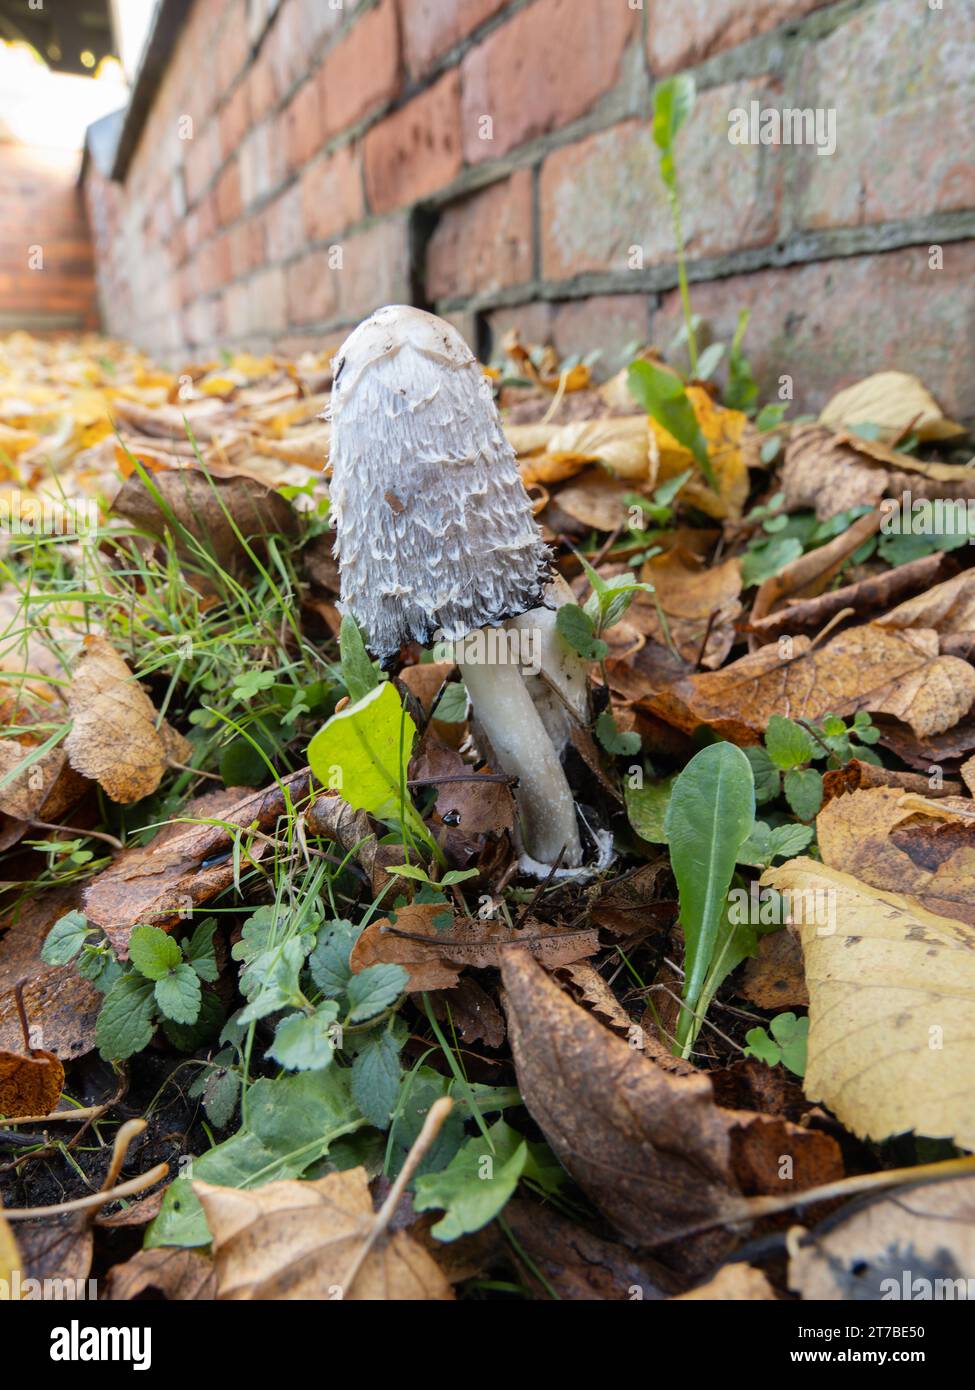 Coprinus comatus, known as the shaggy ink cap, lawyer's wig, or shaggy mane fungus. Stock Photo